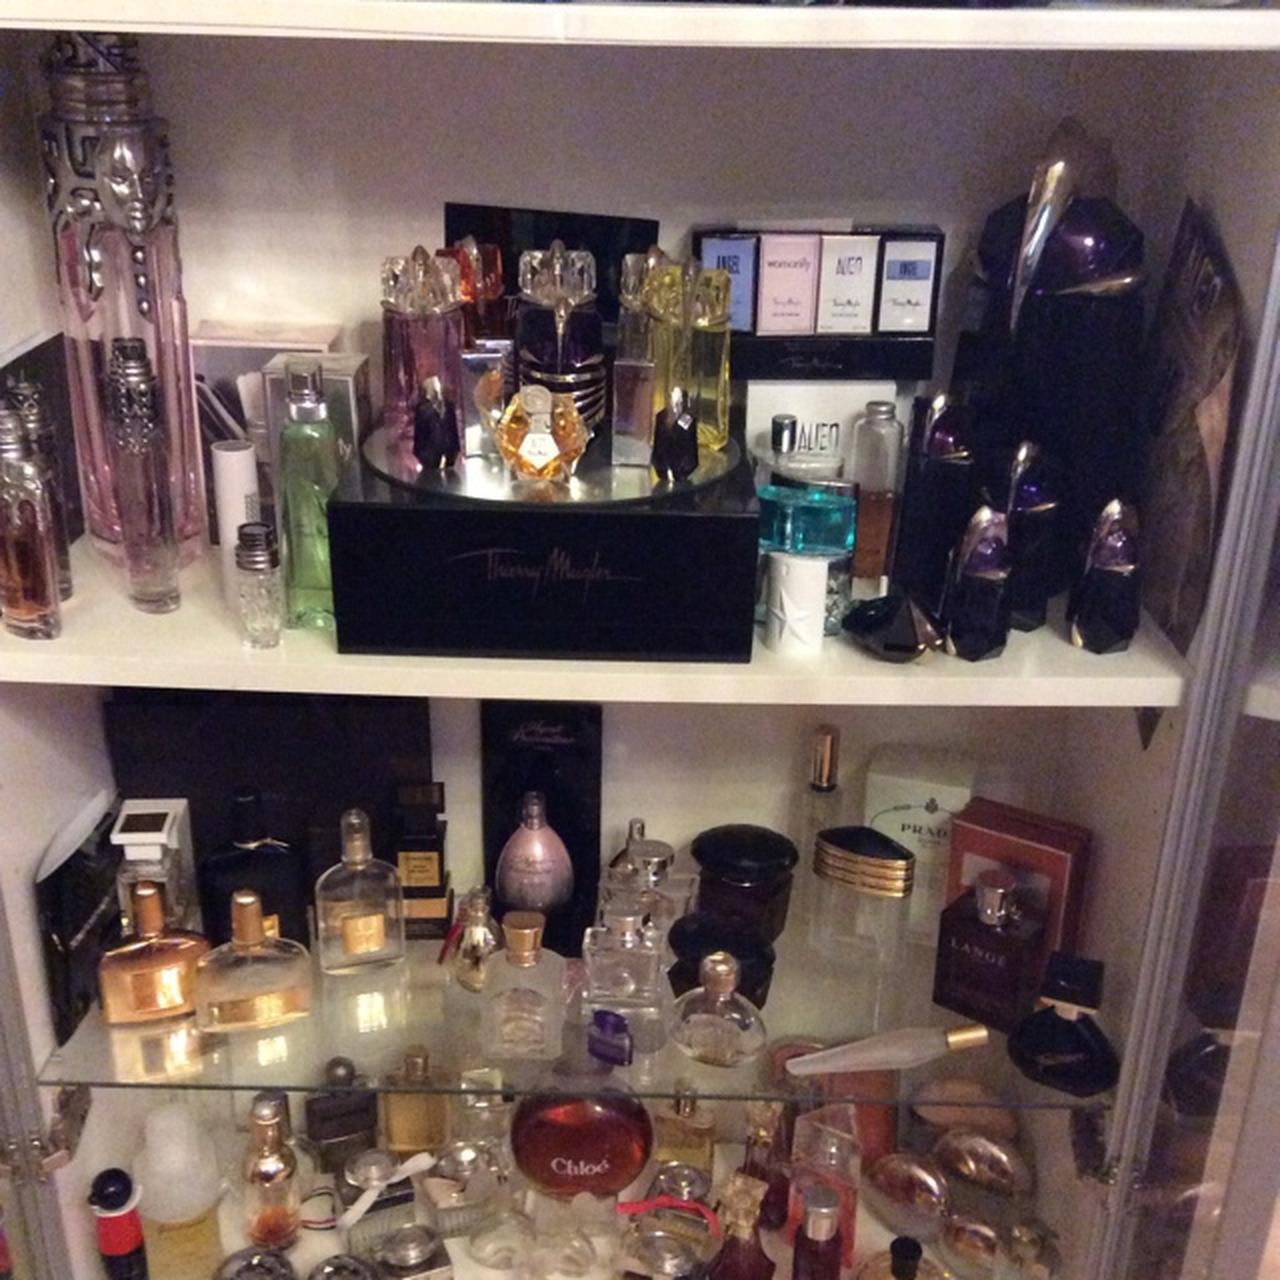 Looking for empty perfume bottles or perfume related